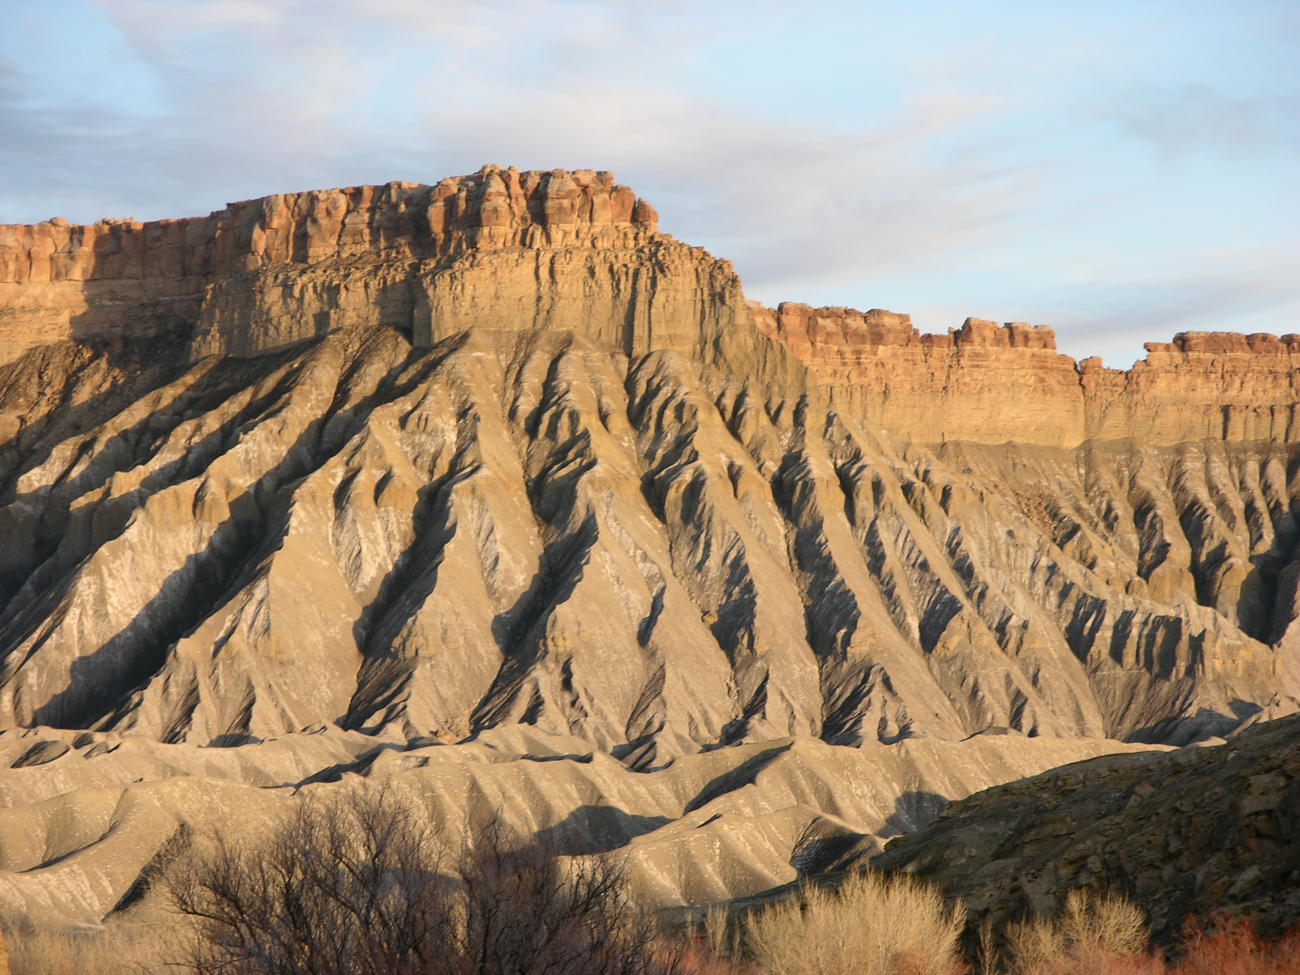 Classic series of gullies formed from water erosion